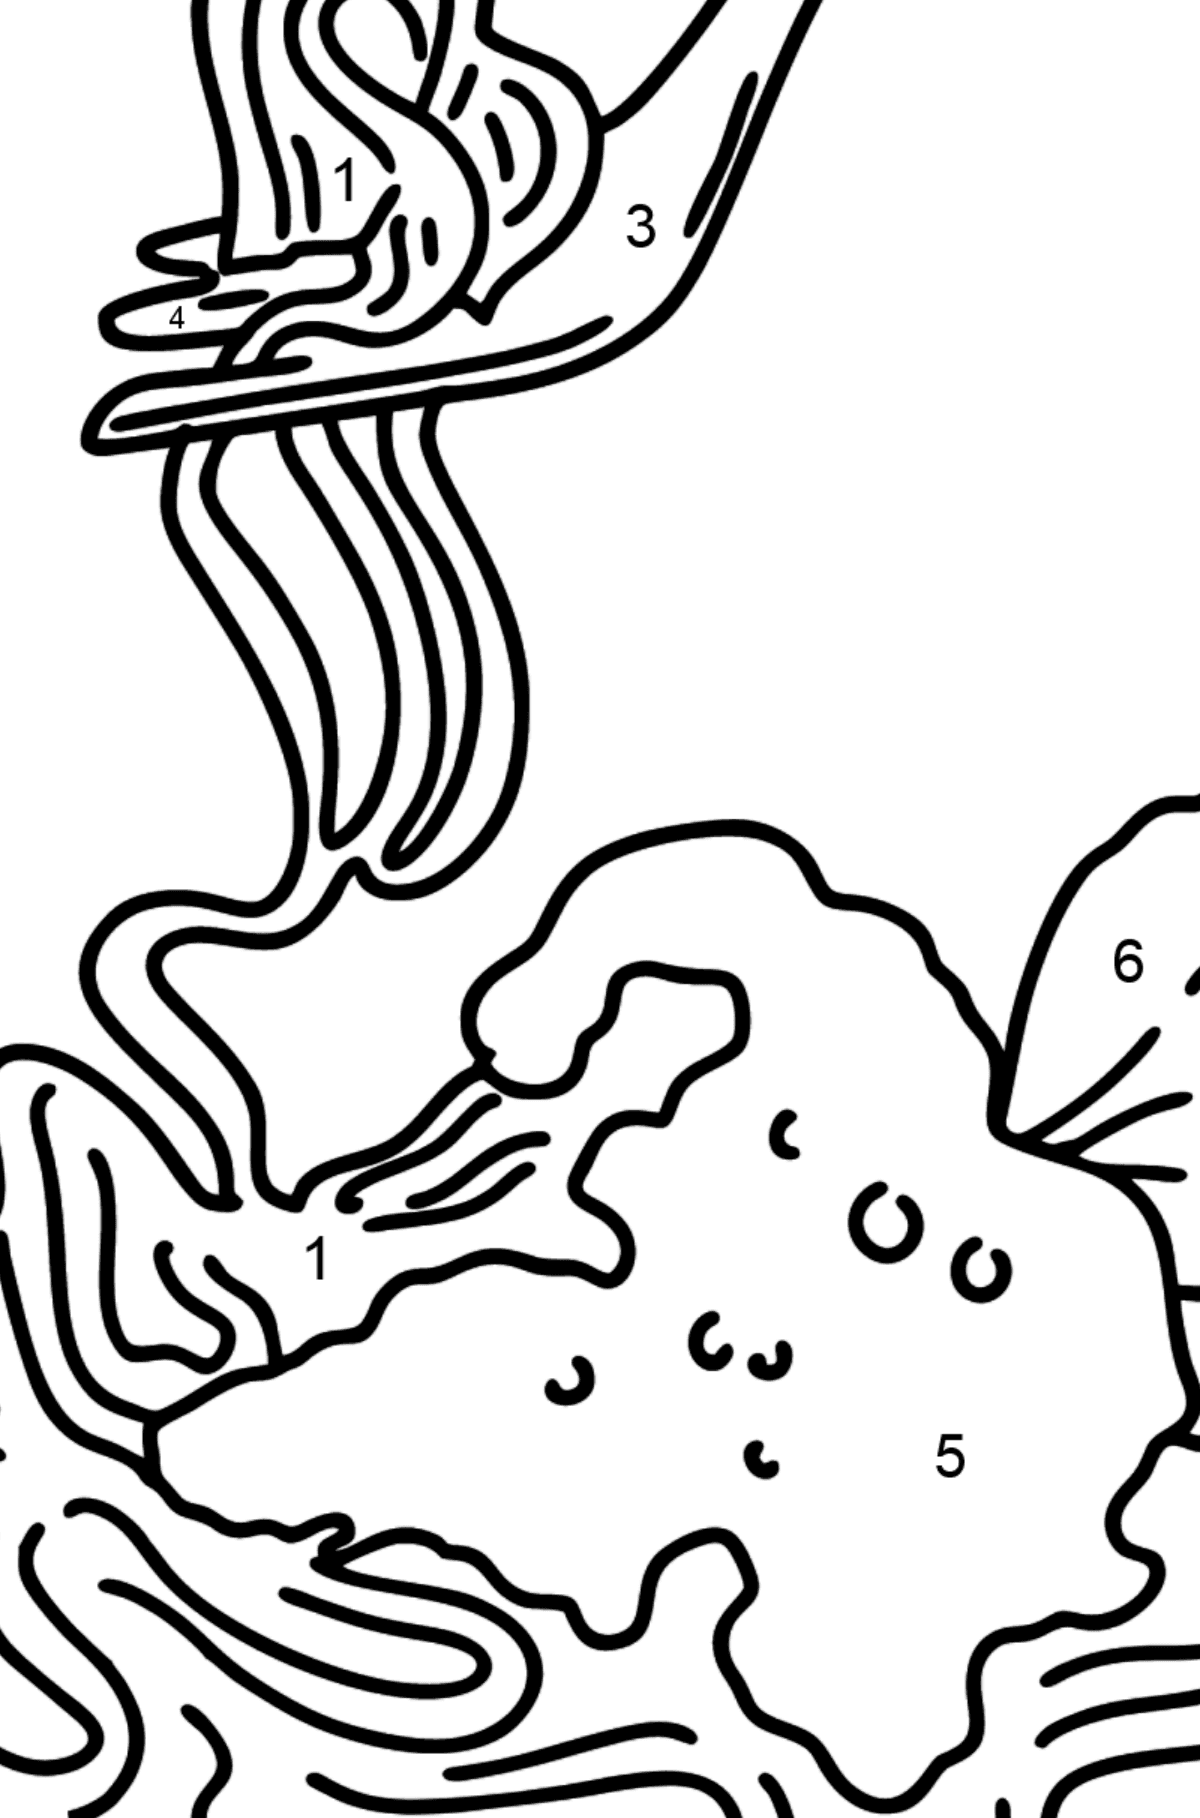 Spaghetti with Tomato Sauce coloring page - Coloring by Numbers for Kids